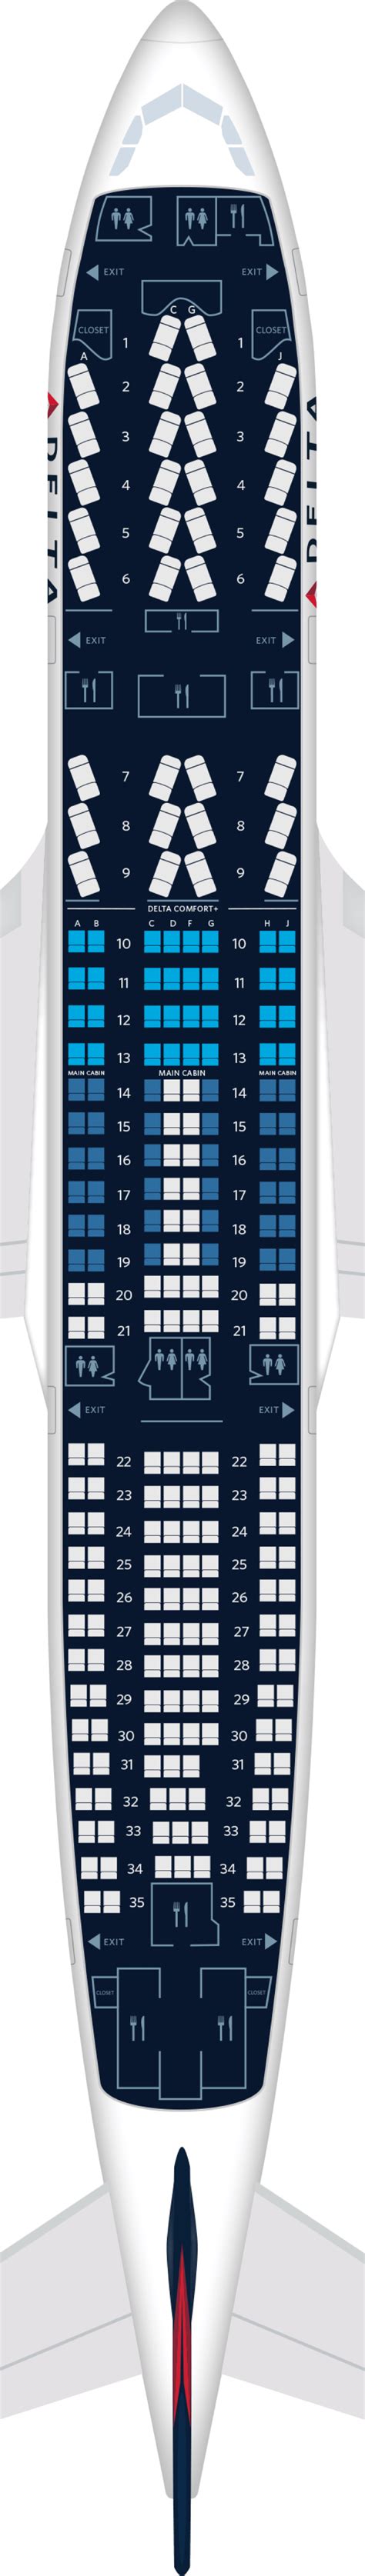 Airbus A Delta Seat Map Background Airbus Way